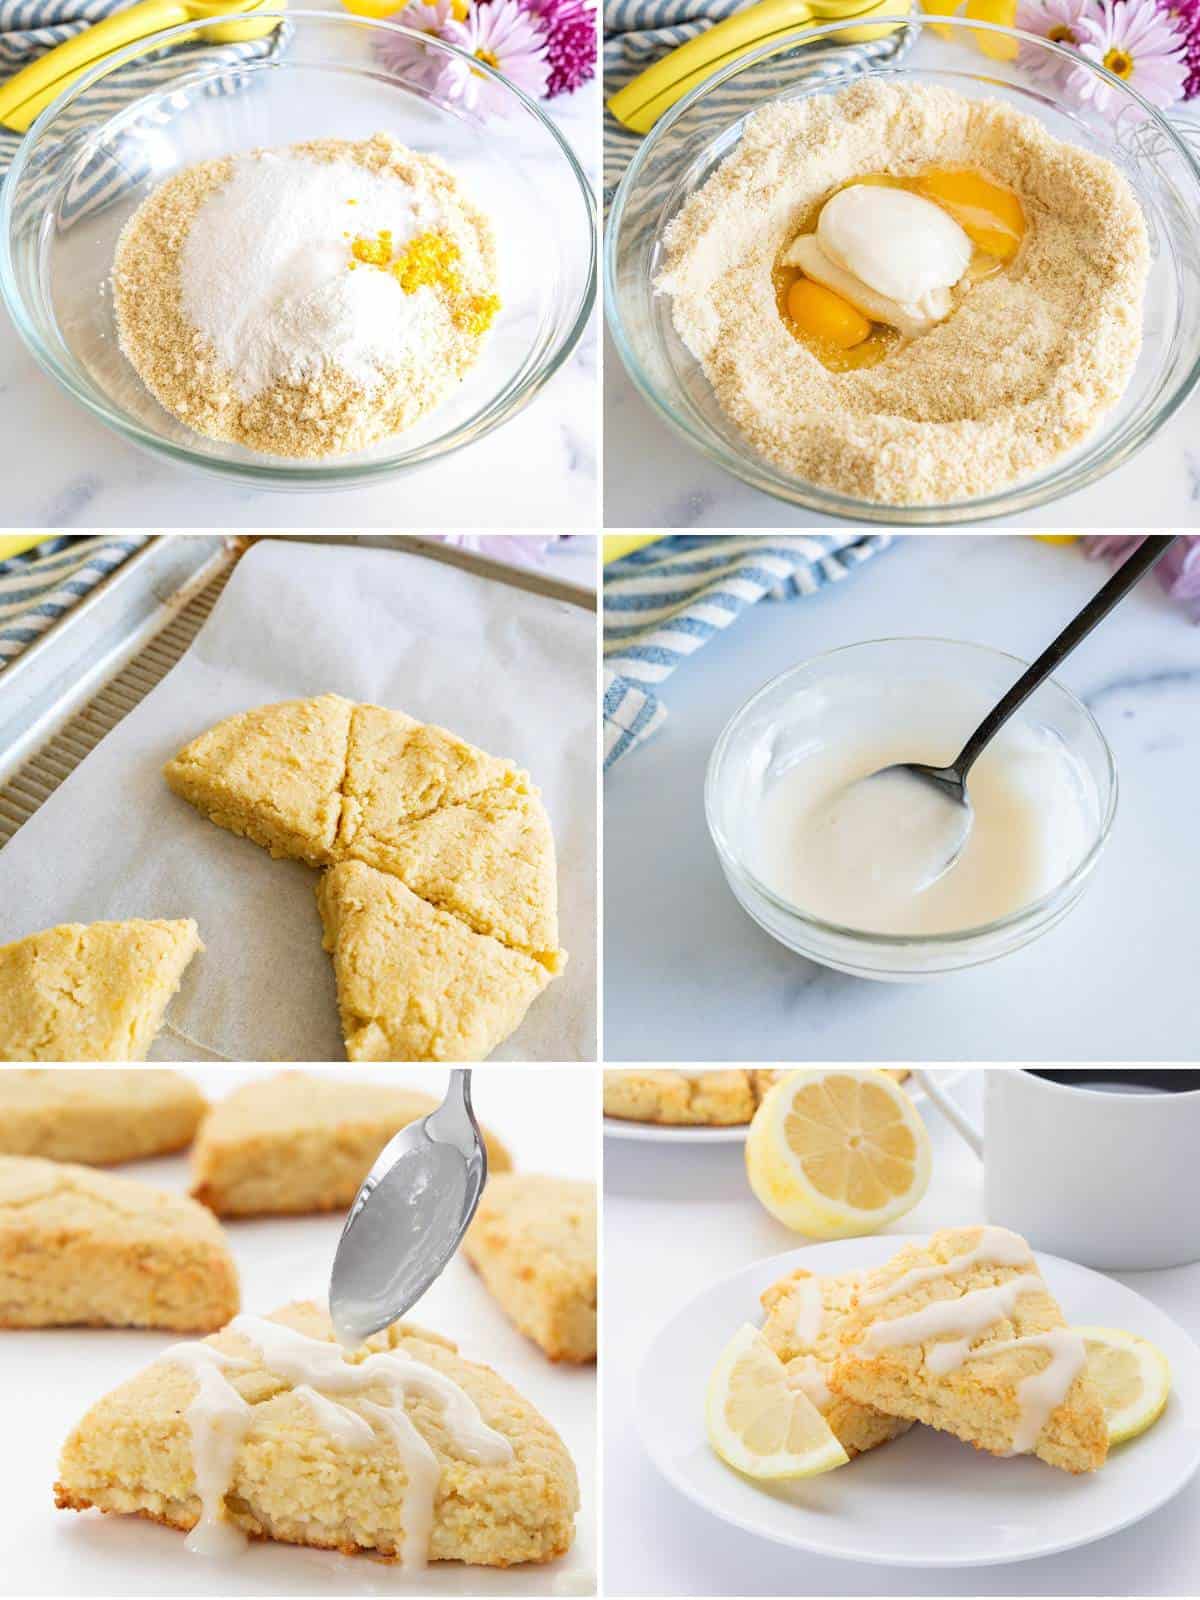 A collage of 6 images showing how to make Keto Lemon Ricotta Scones.